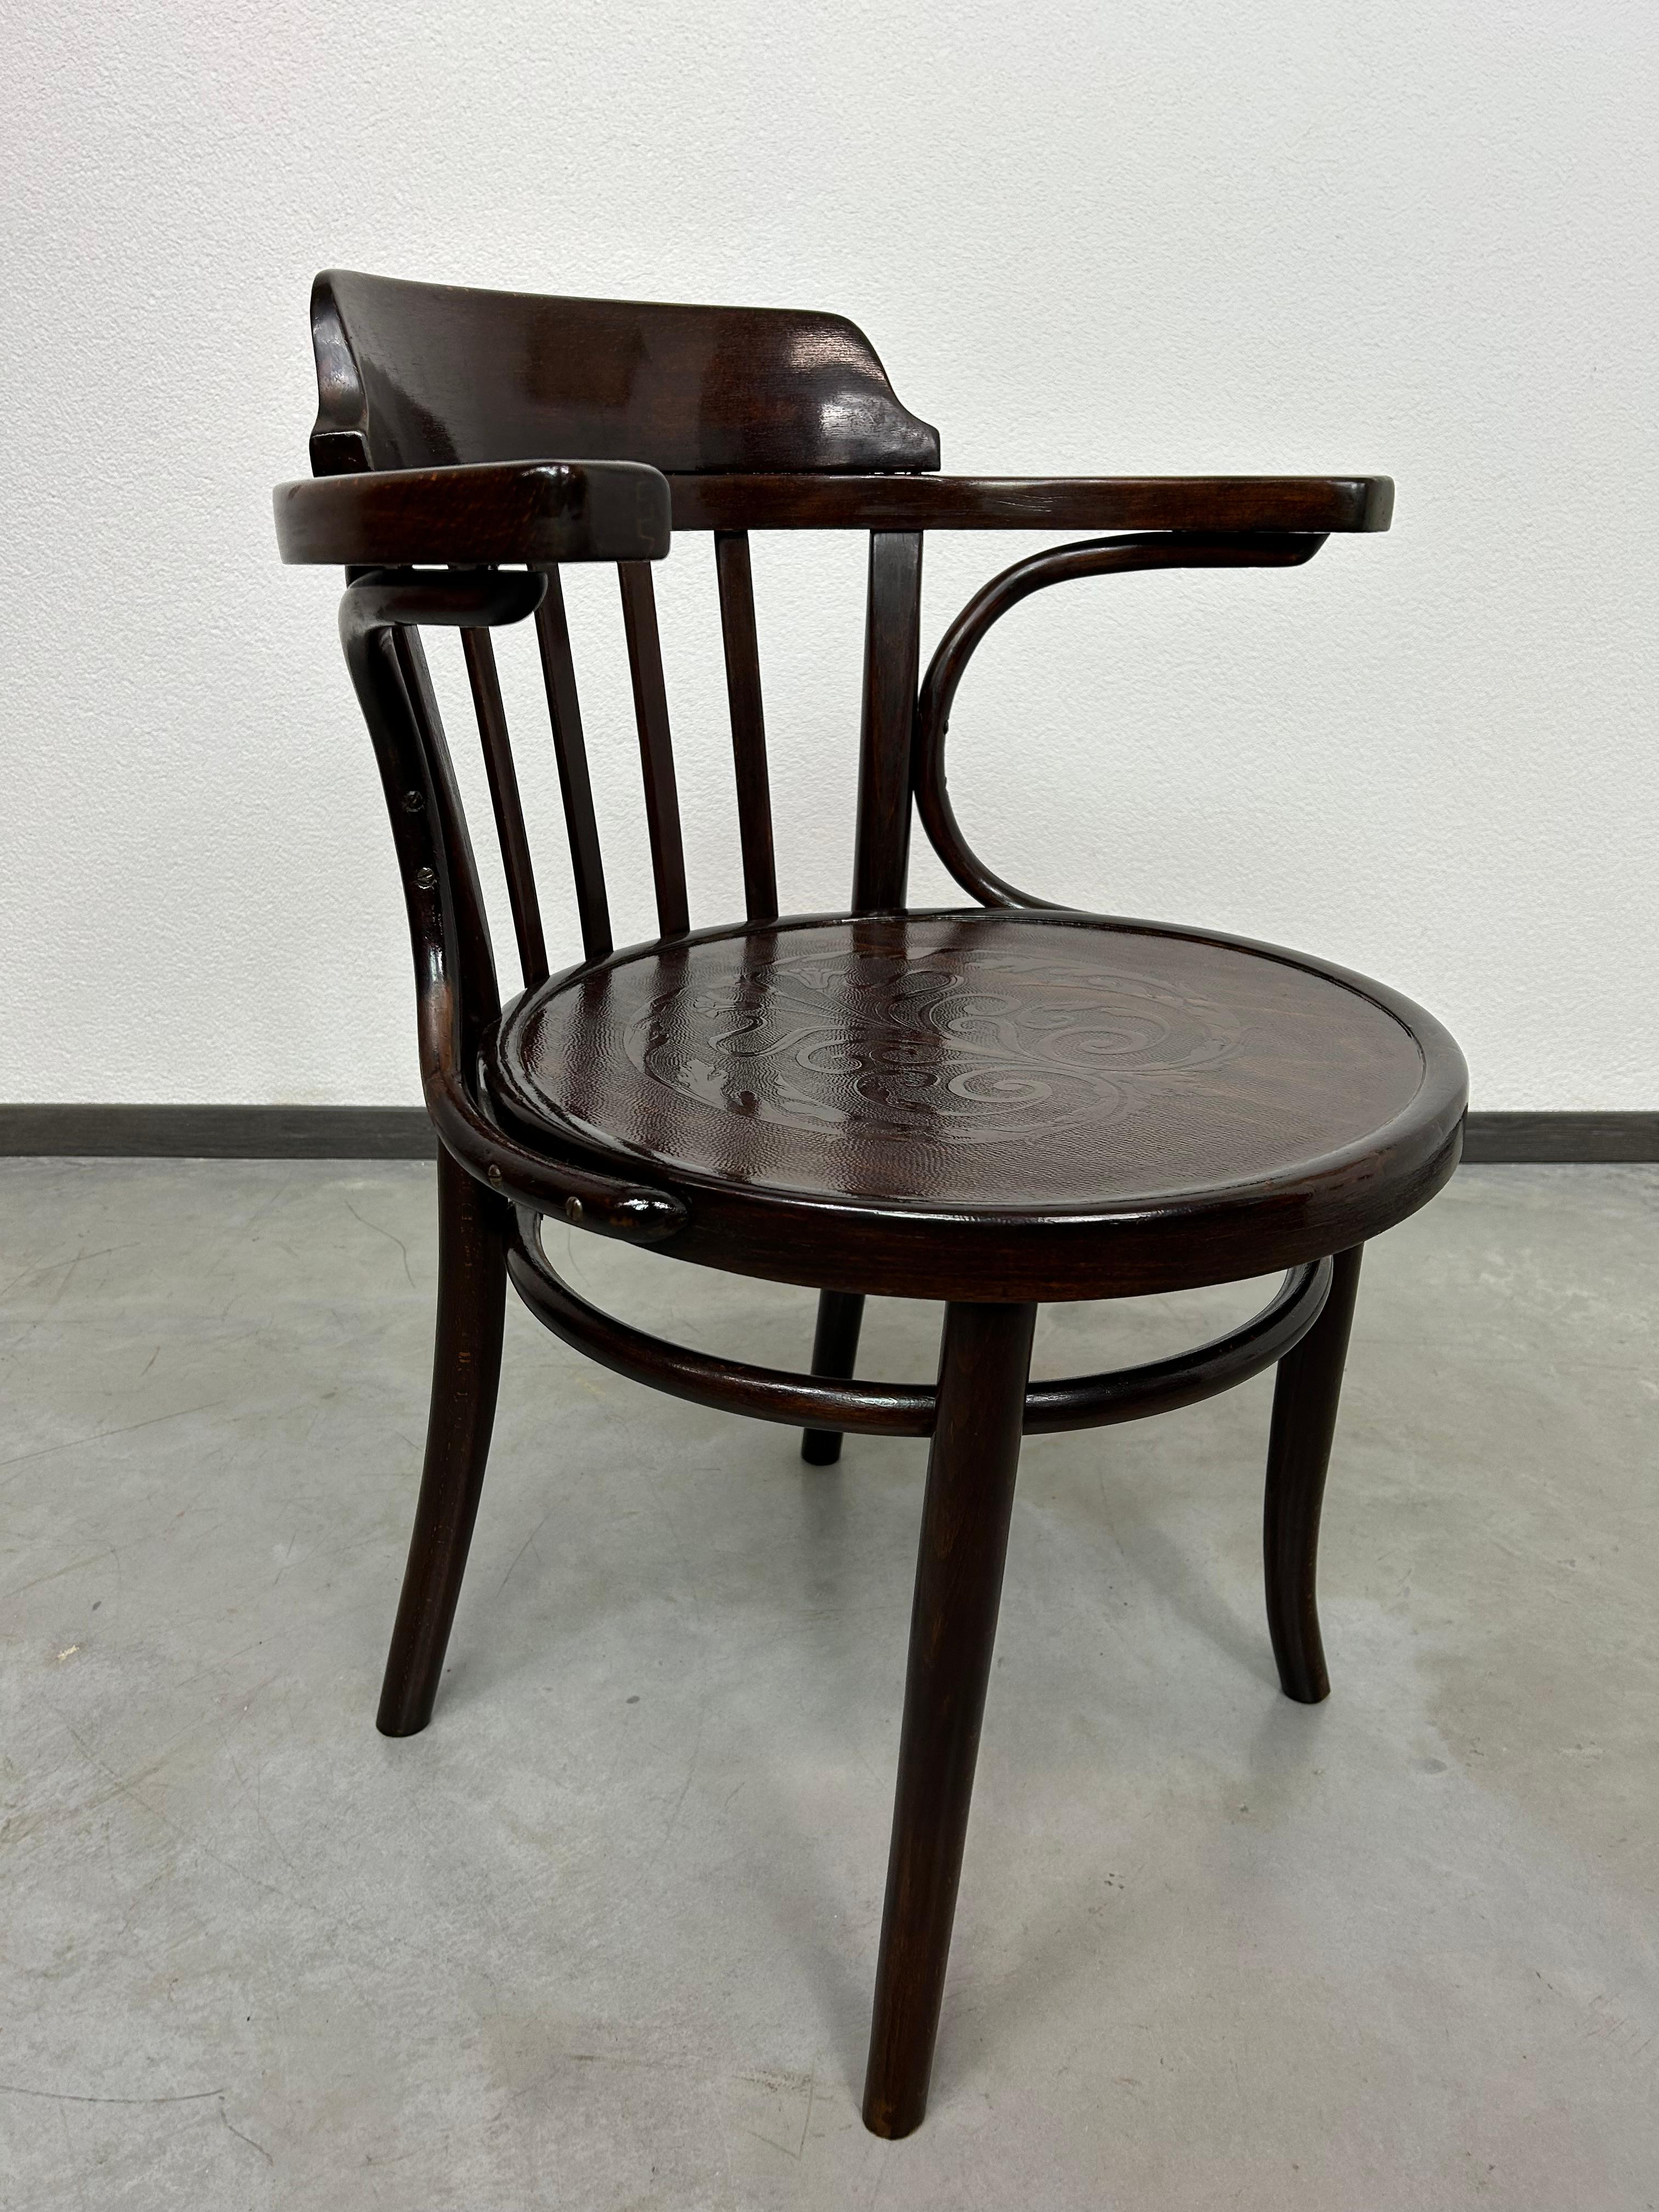 Early 20th Century Jugendstil desk chair by Thonet